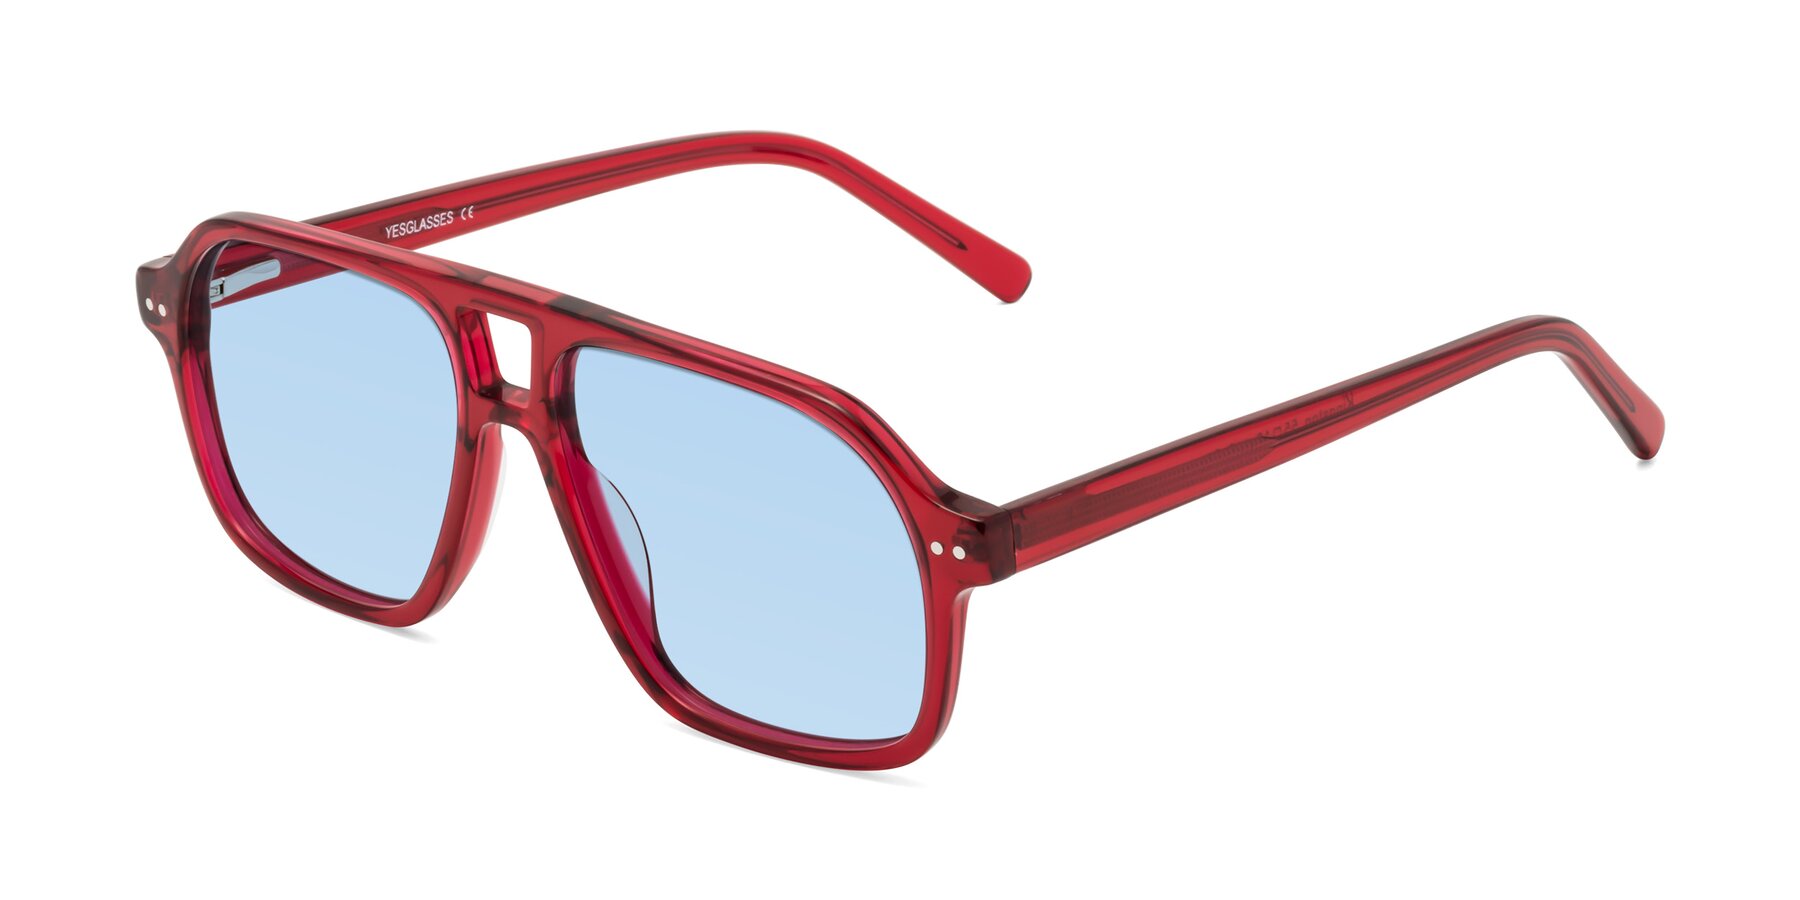 Angle of Kingston in Wine with Light Blue Tinted Lenses